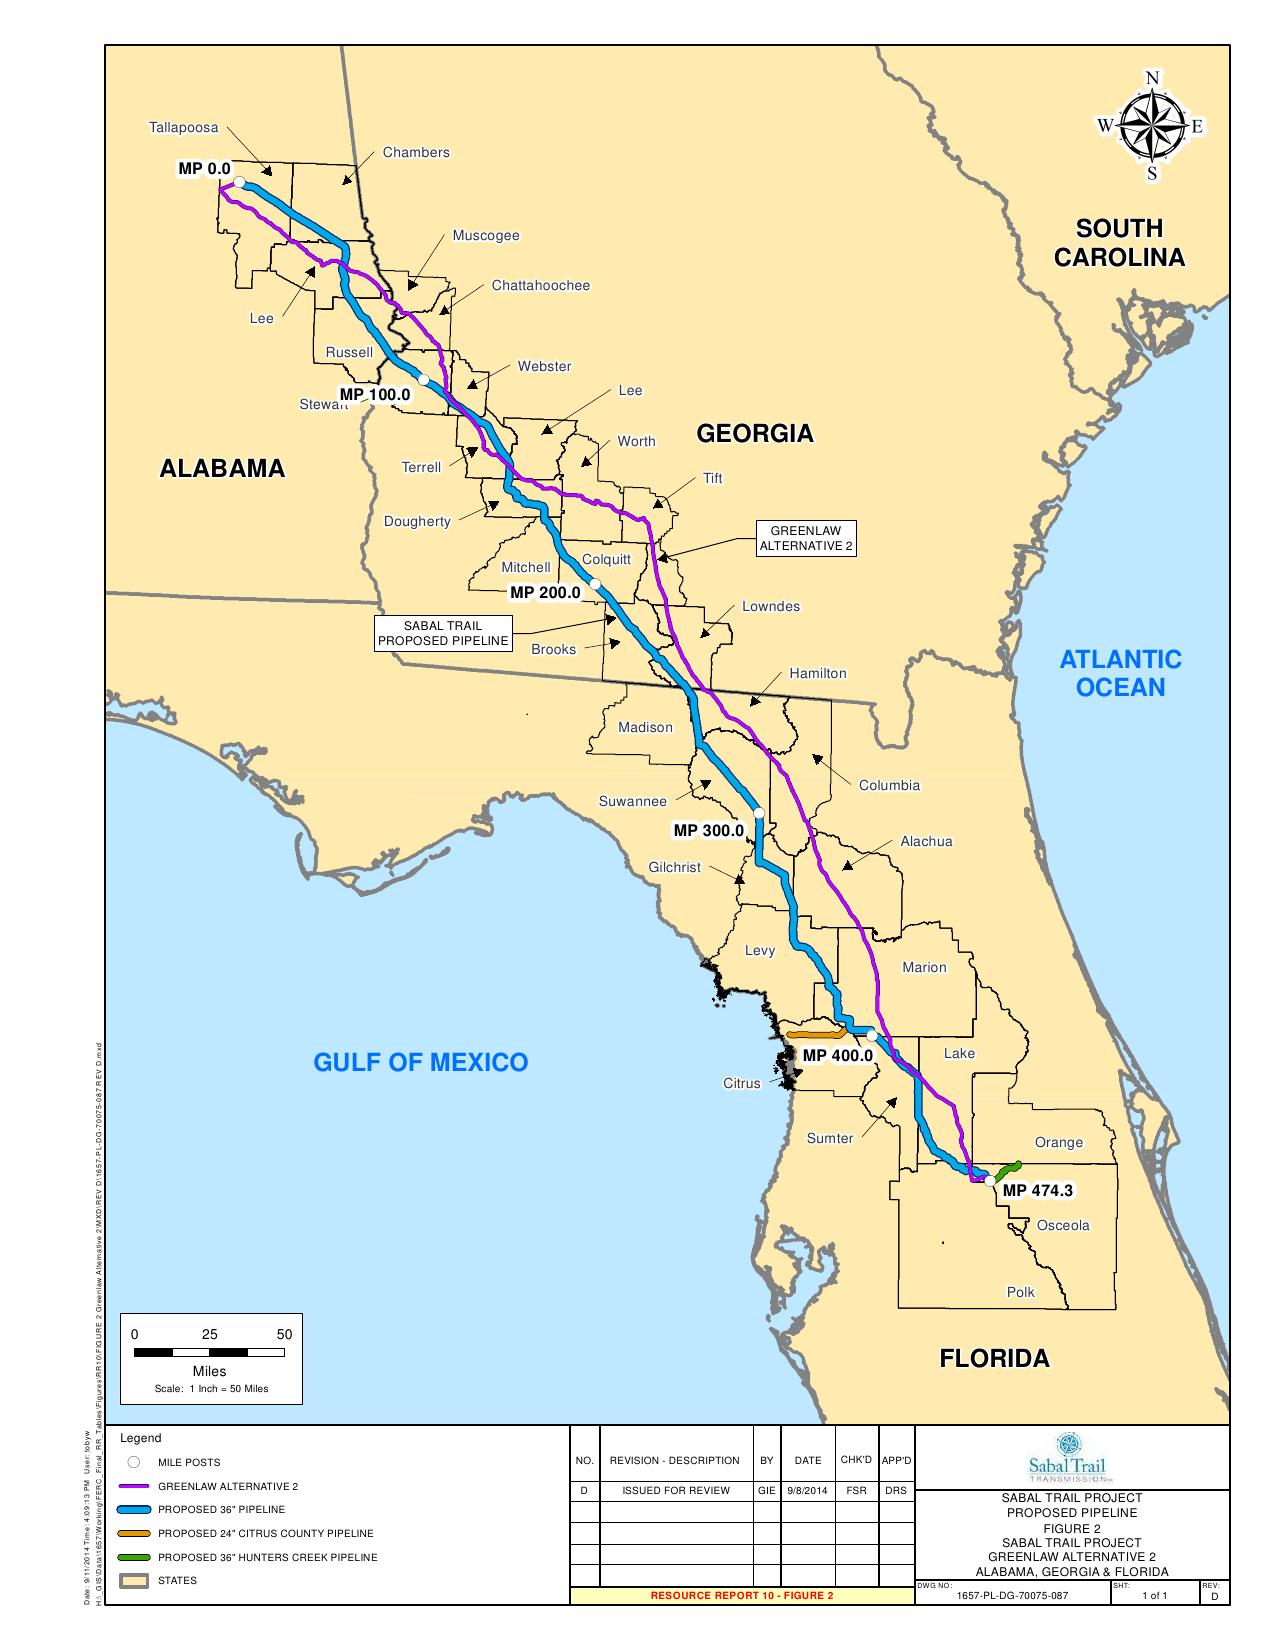 1275x1650 GreenLaw Alternative 2, in Response to FERC directive of 26 August 2014, by Sabal Trail Transmission, for SpectraBusters.org, 15 September 2014